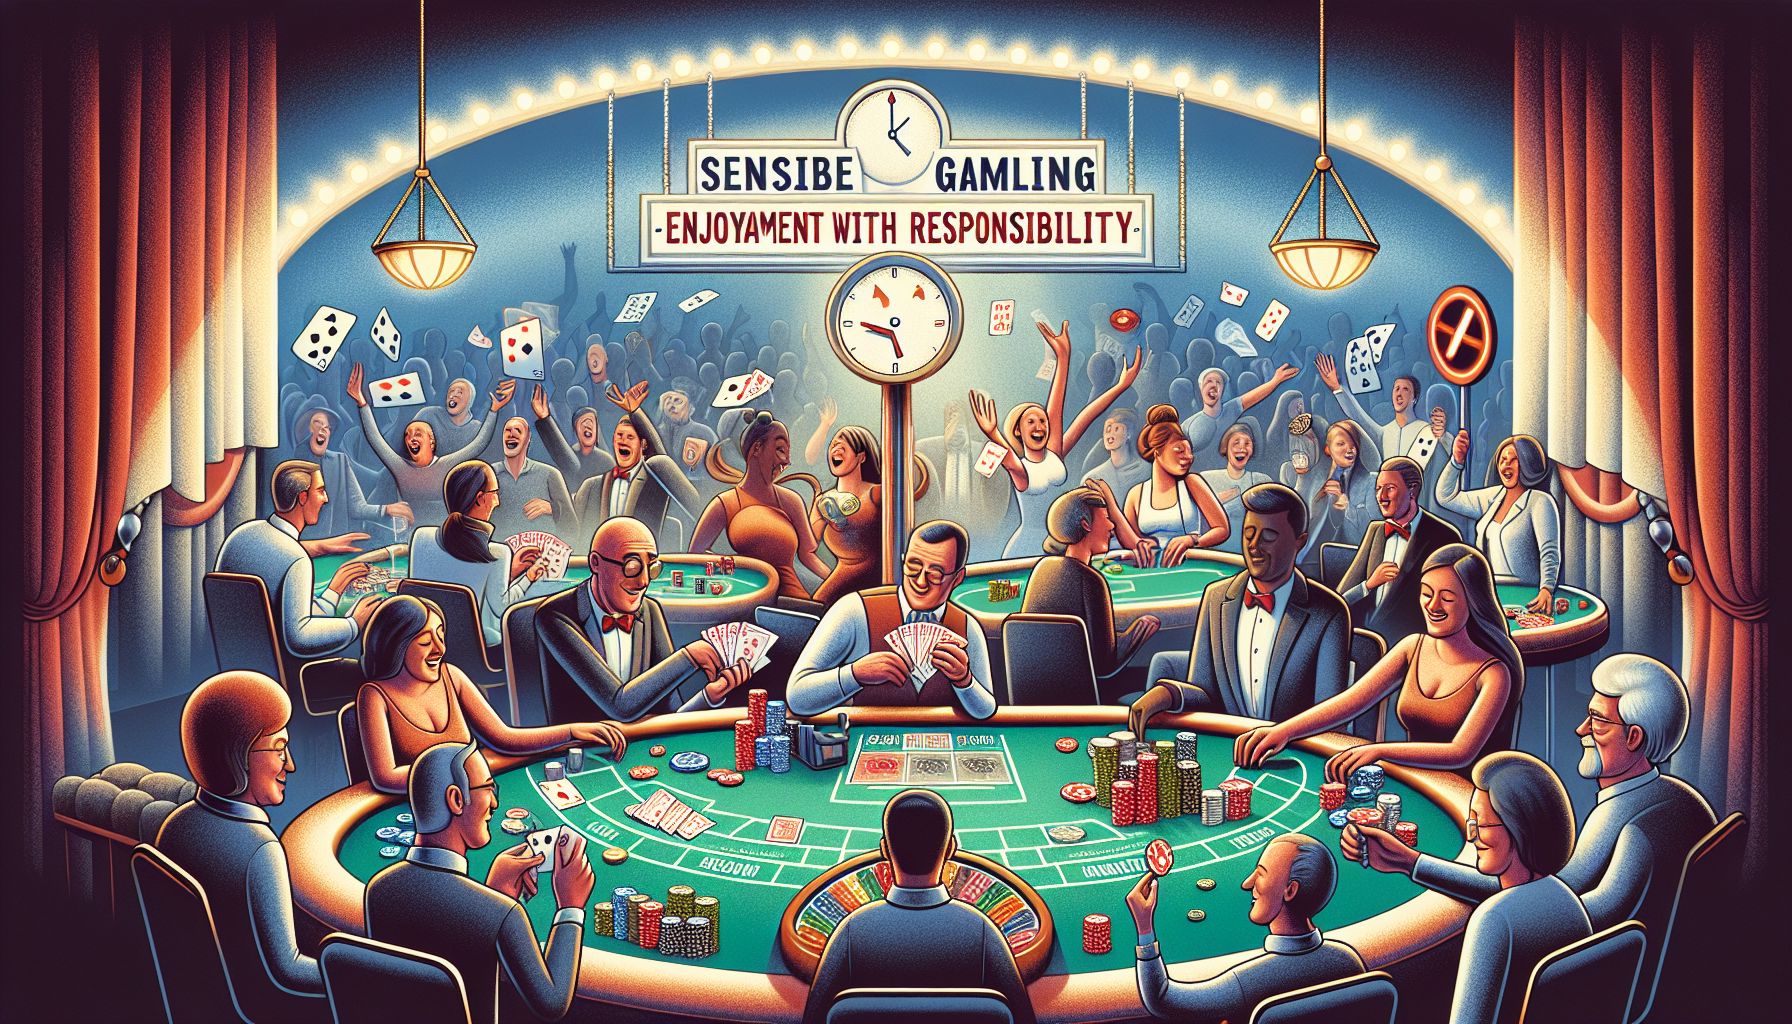 A Sensible Approach to Gambling: Enjoyment with Responsibility